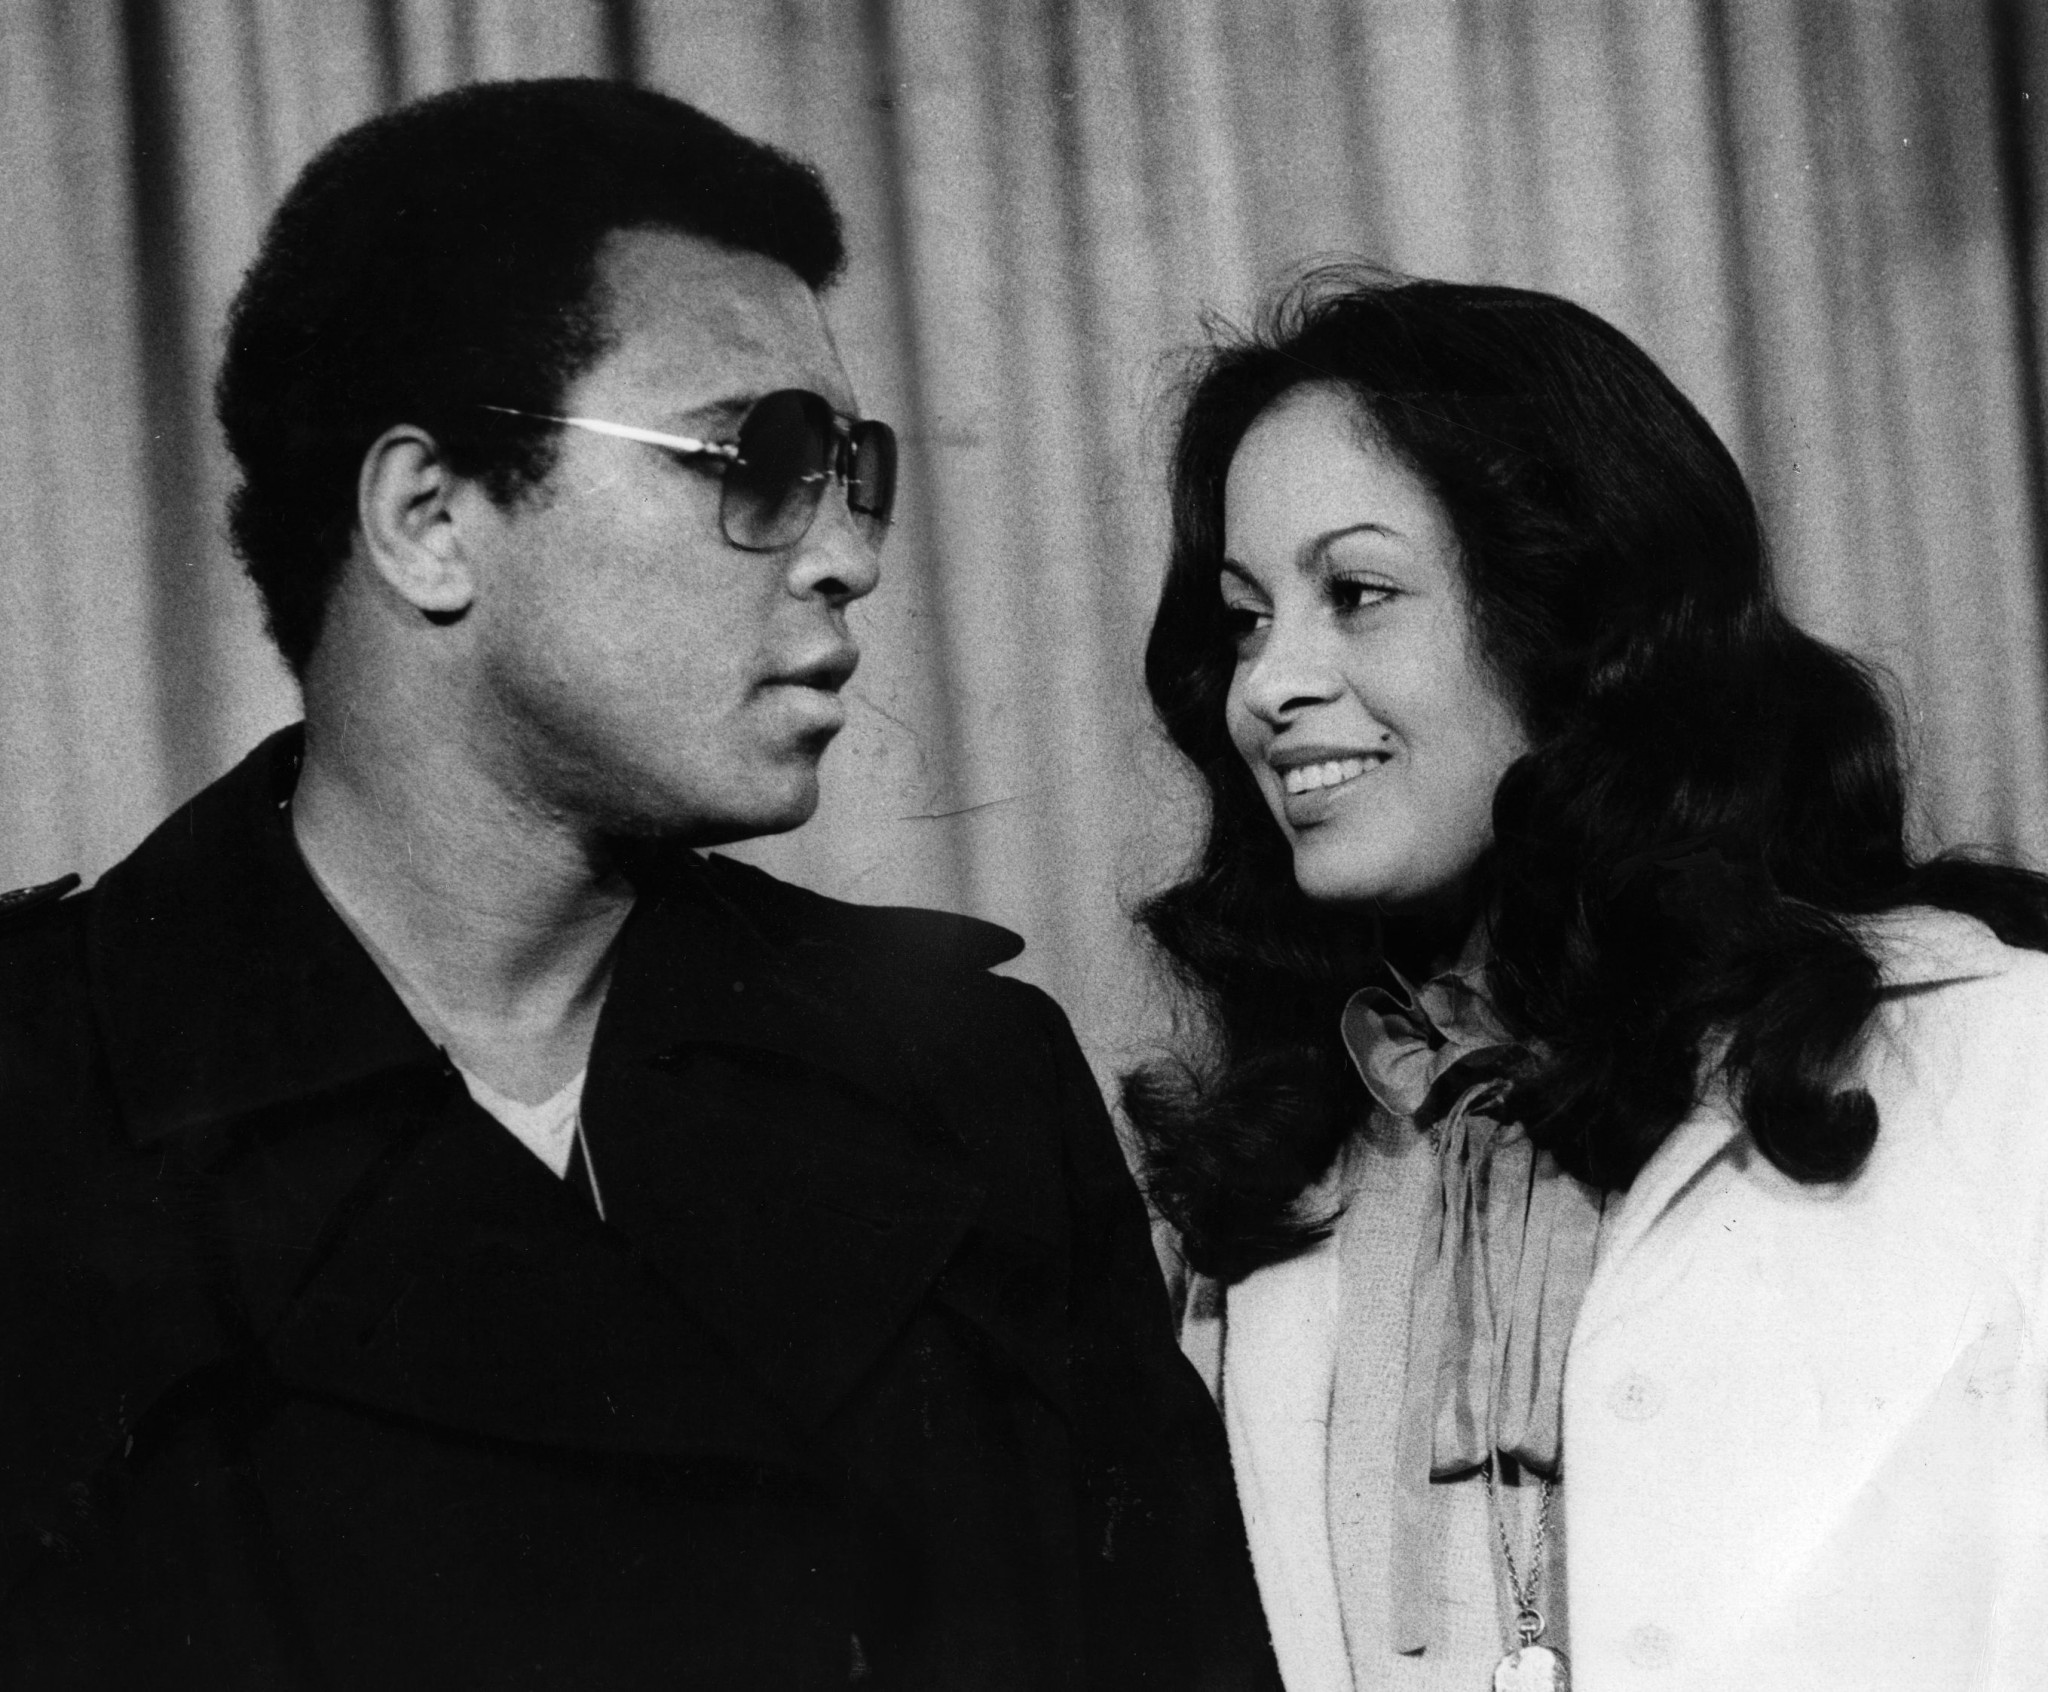 Muhammad Ali with his wife Veronica at Heathrow Airport ©Getty Images